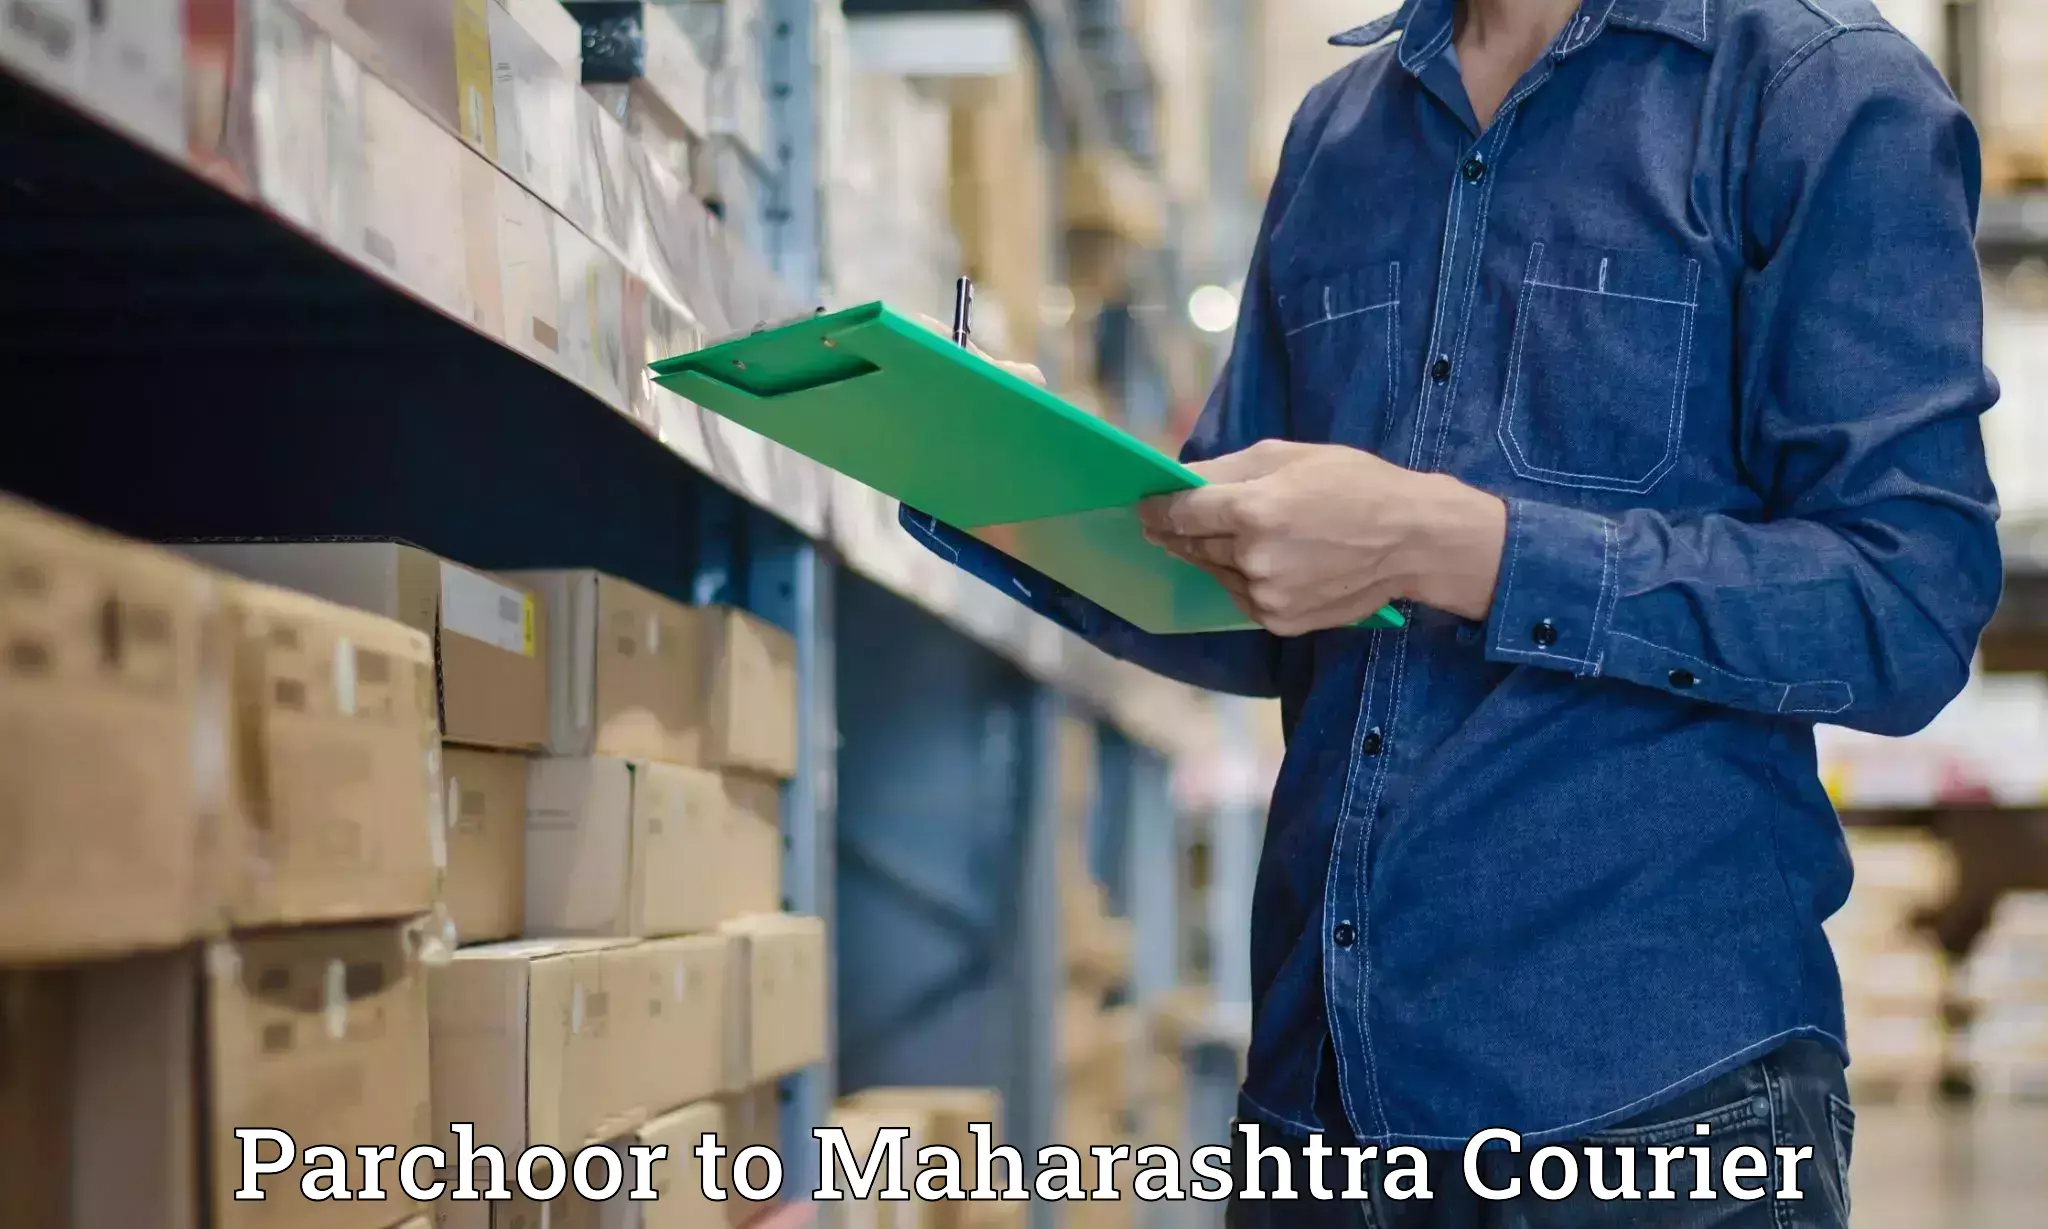 Pharmaceutical courier Parchoor to Maharashtra